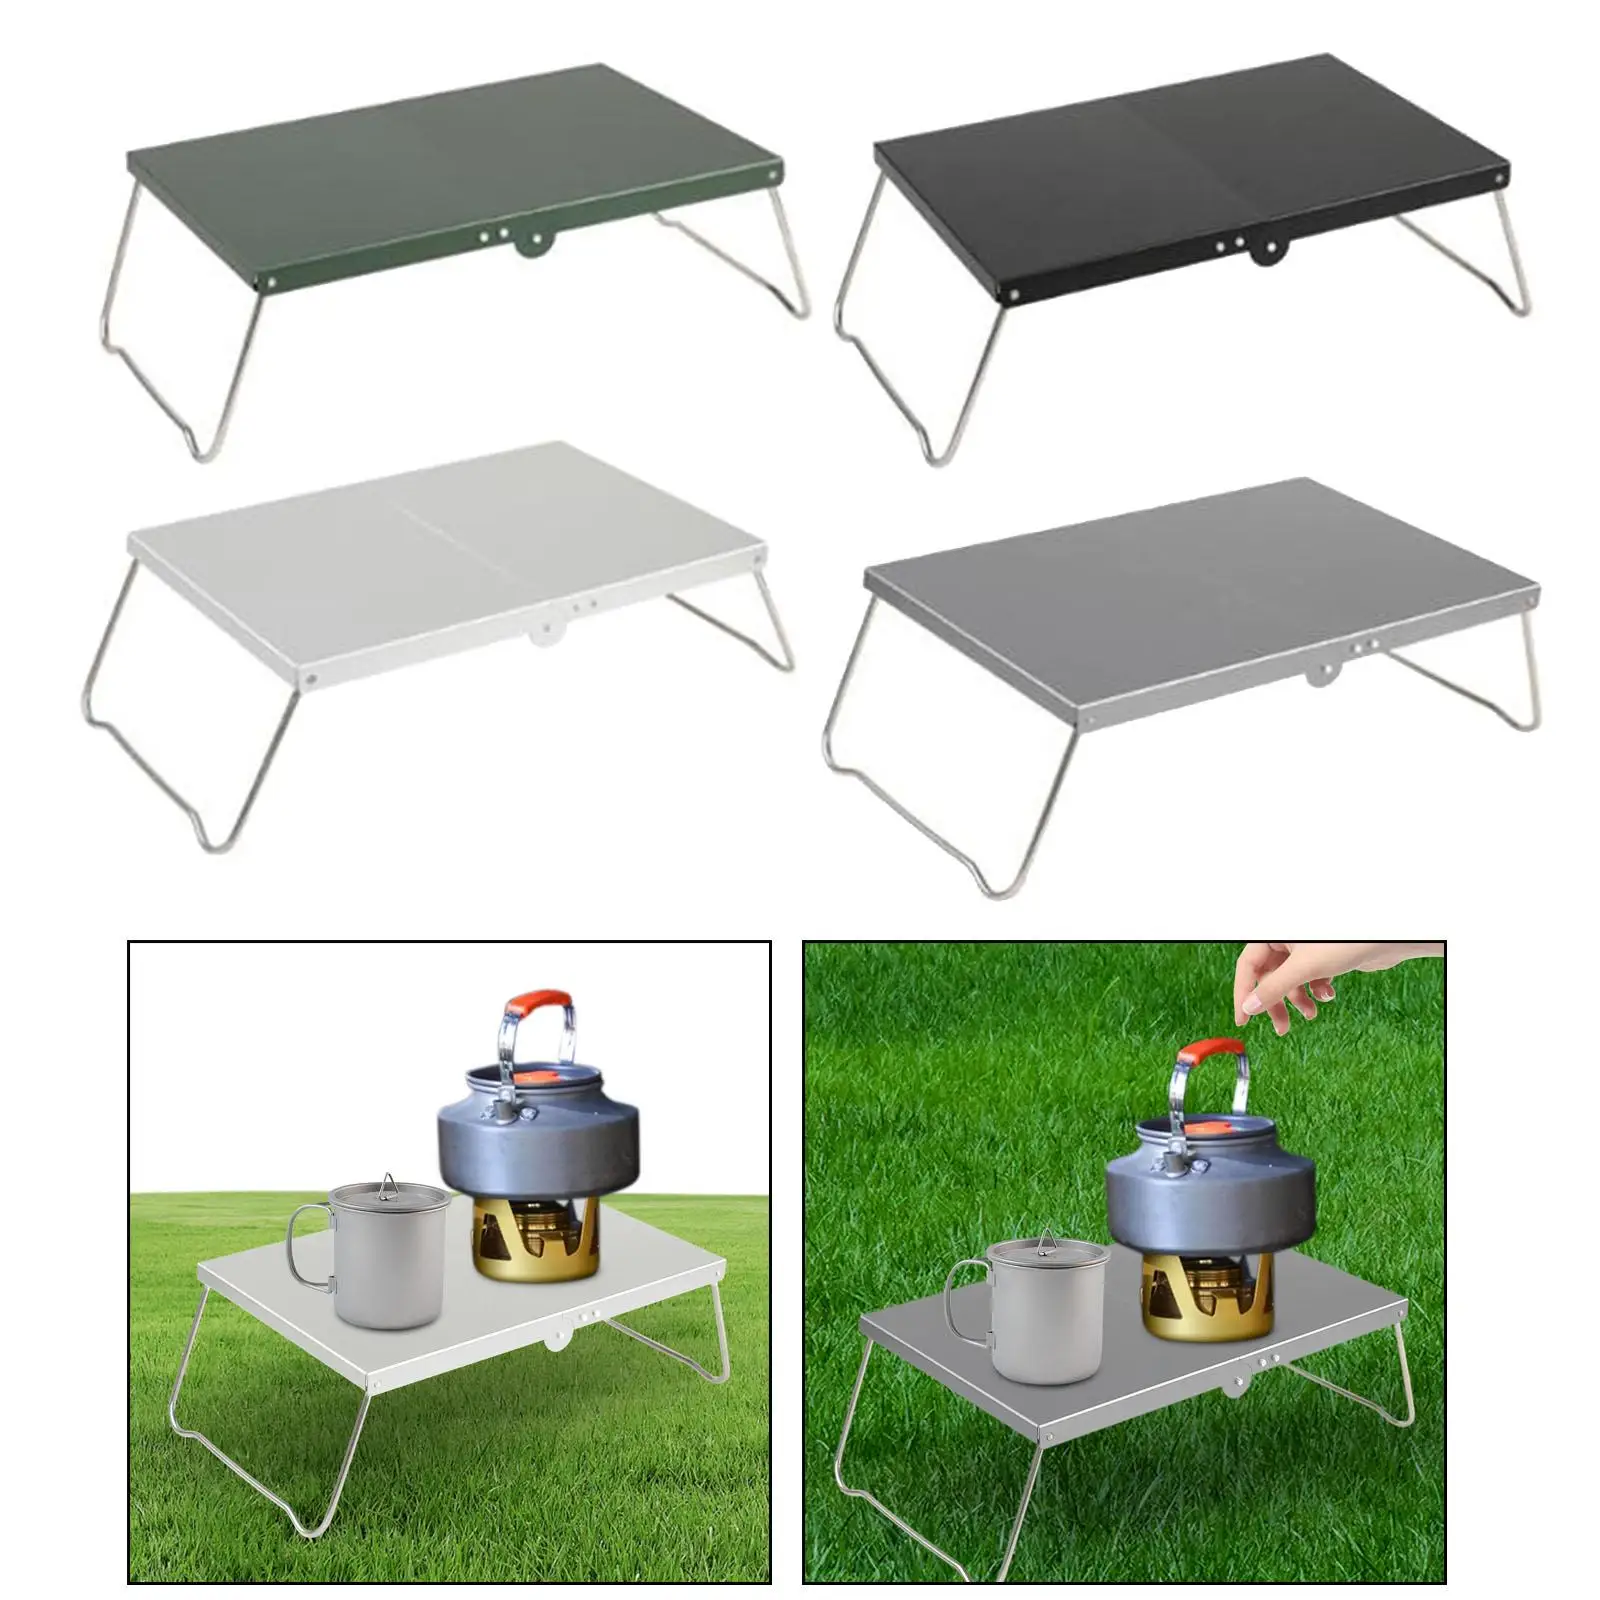 Camping Folding Table Outdoor Three Legged Multifunctional Portable Foldable Desk Camping Desk for Picnic Hiking BBQ Backyard